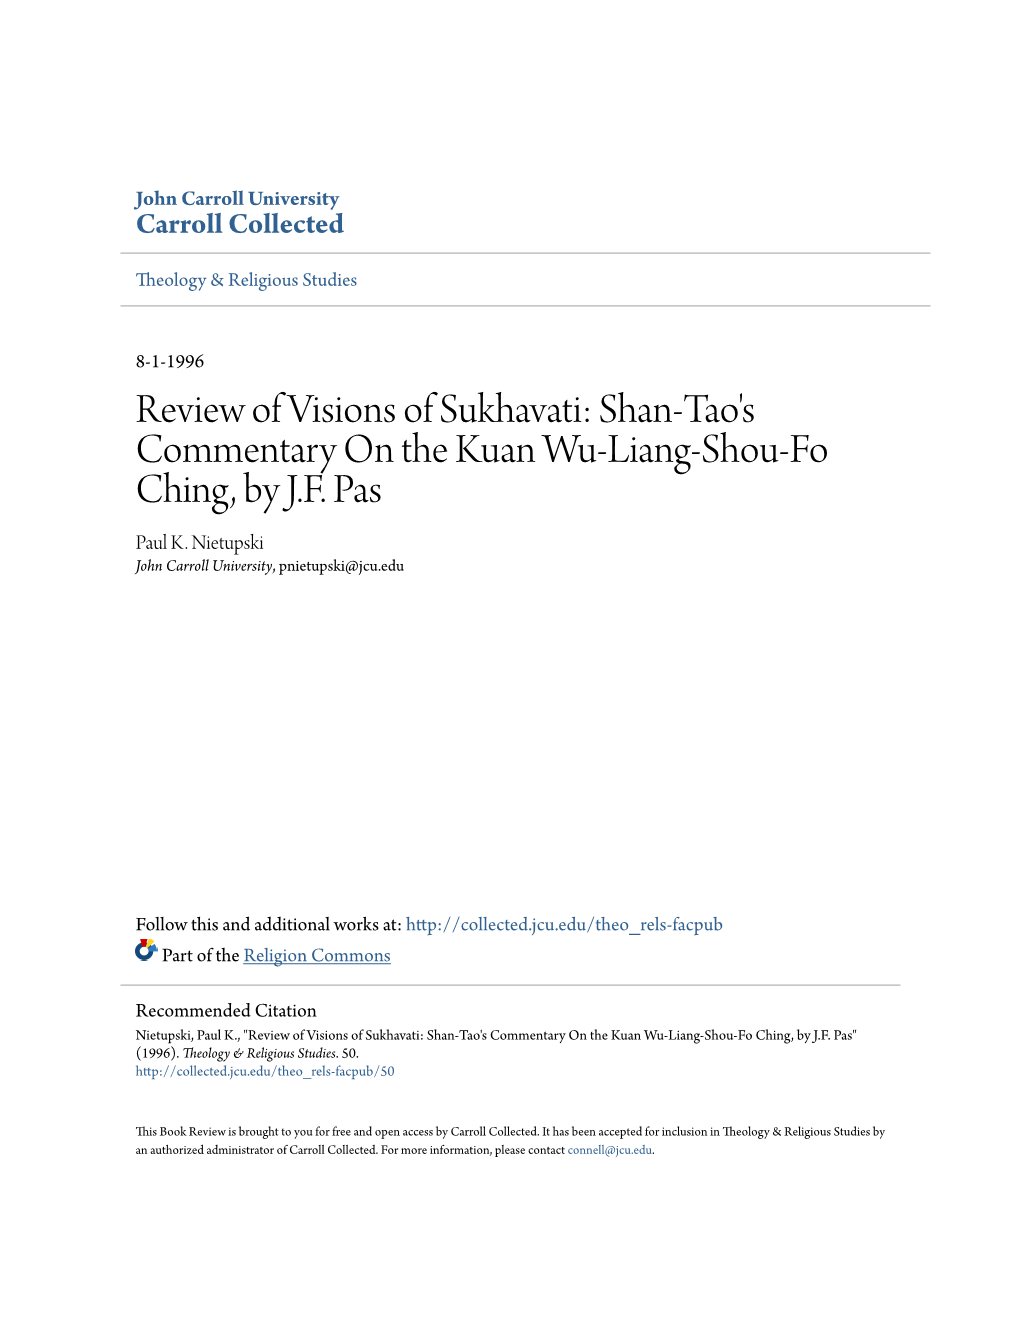 Review of Visions of Sukhavati: Shan-Tao's Commentary on the Kuan Wu-Liang-Shou-Fo Ching, by J.F